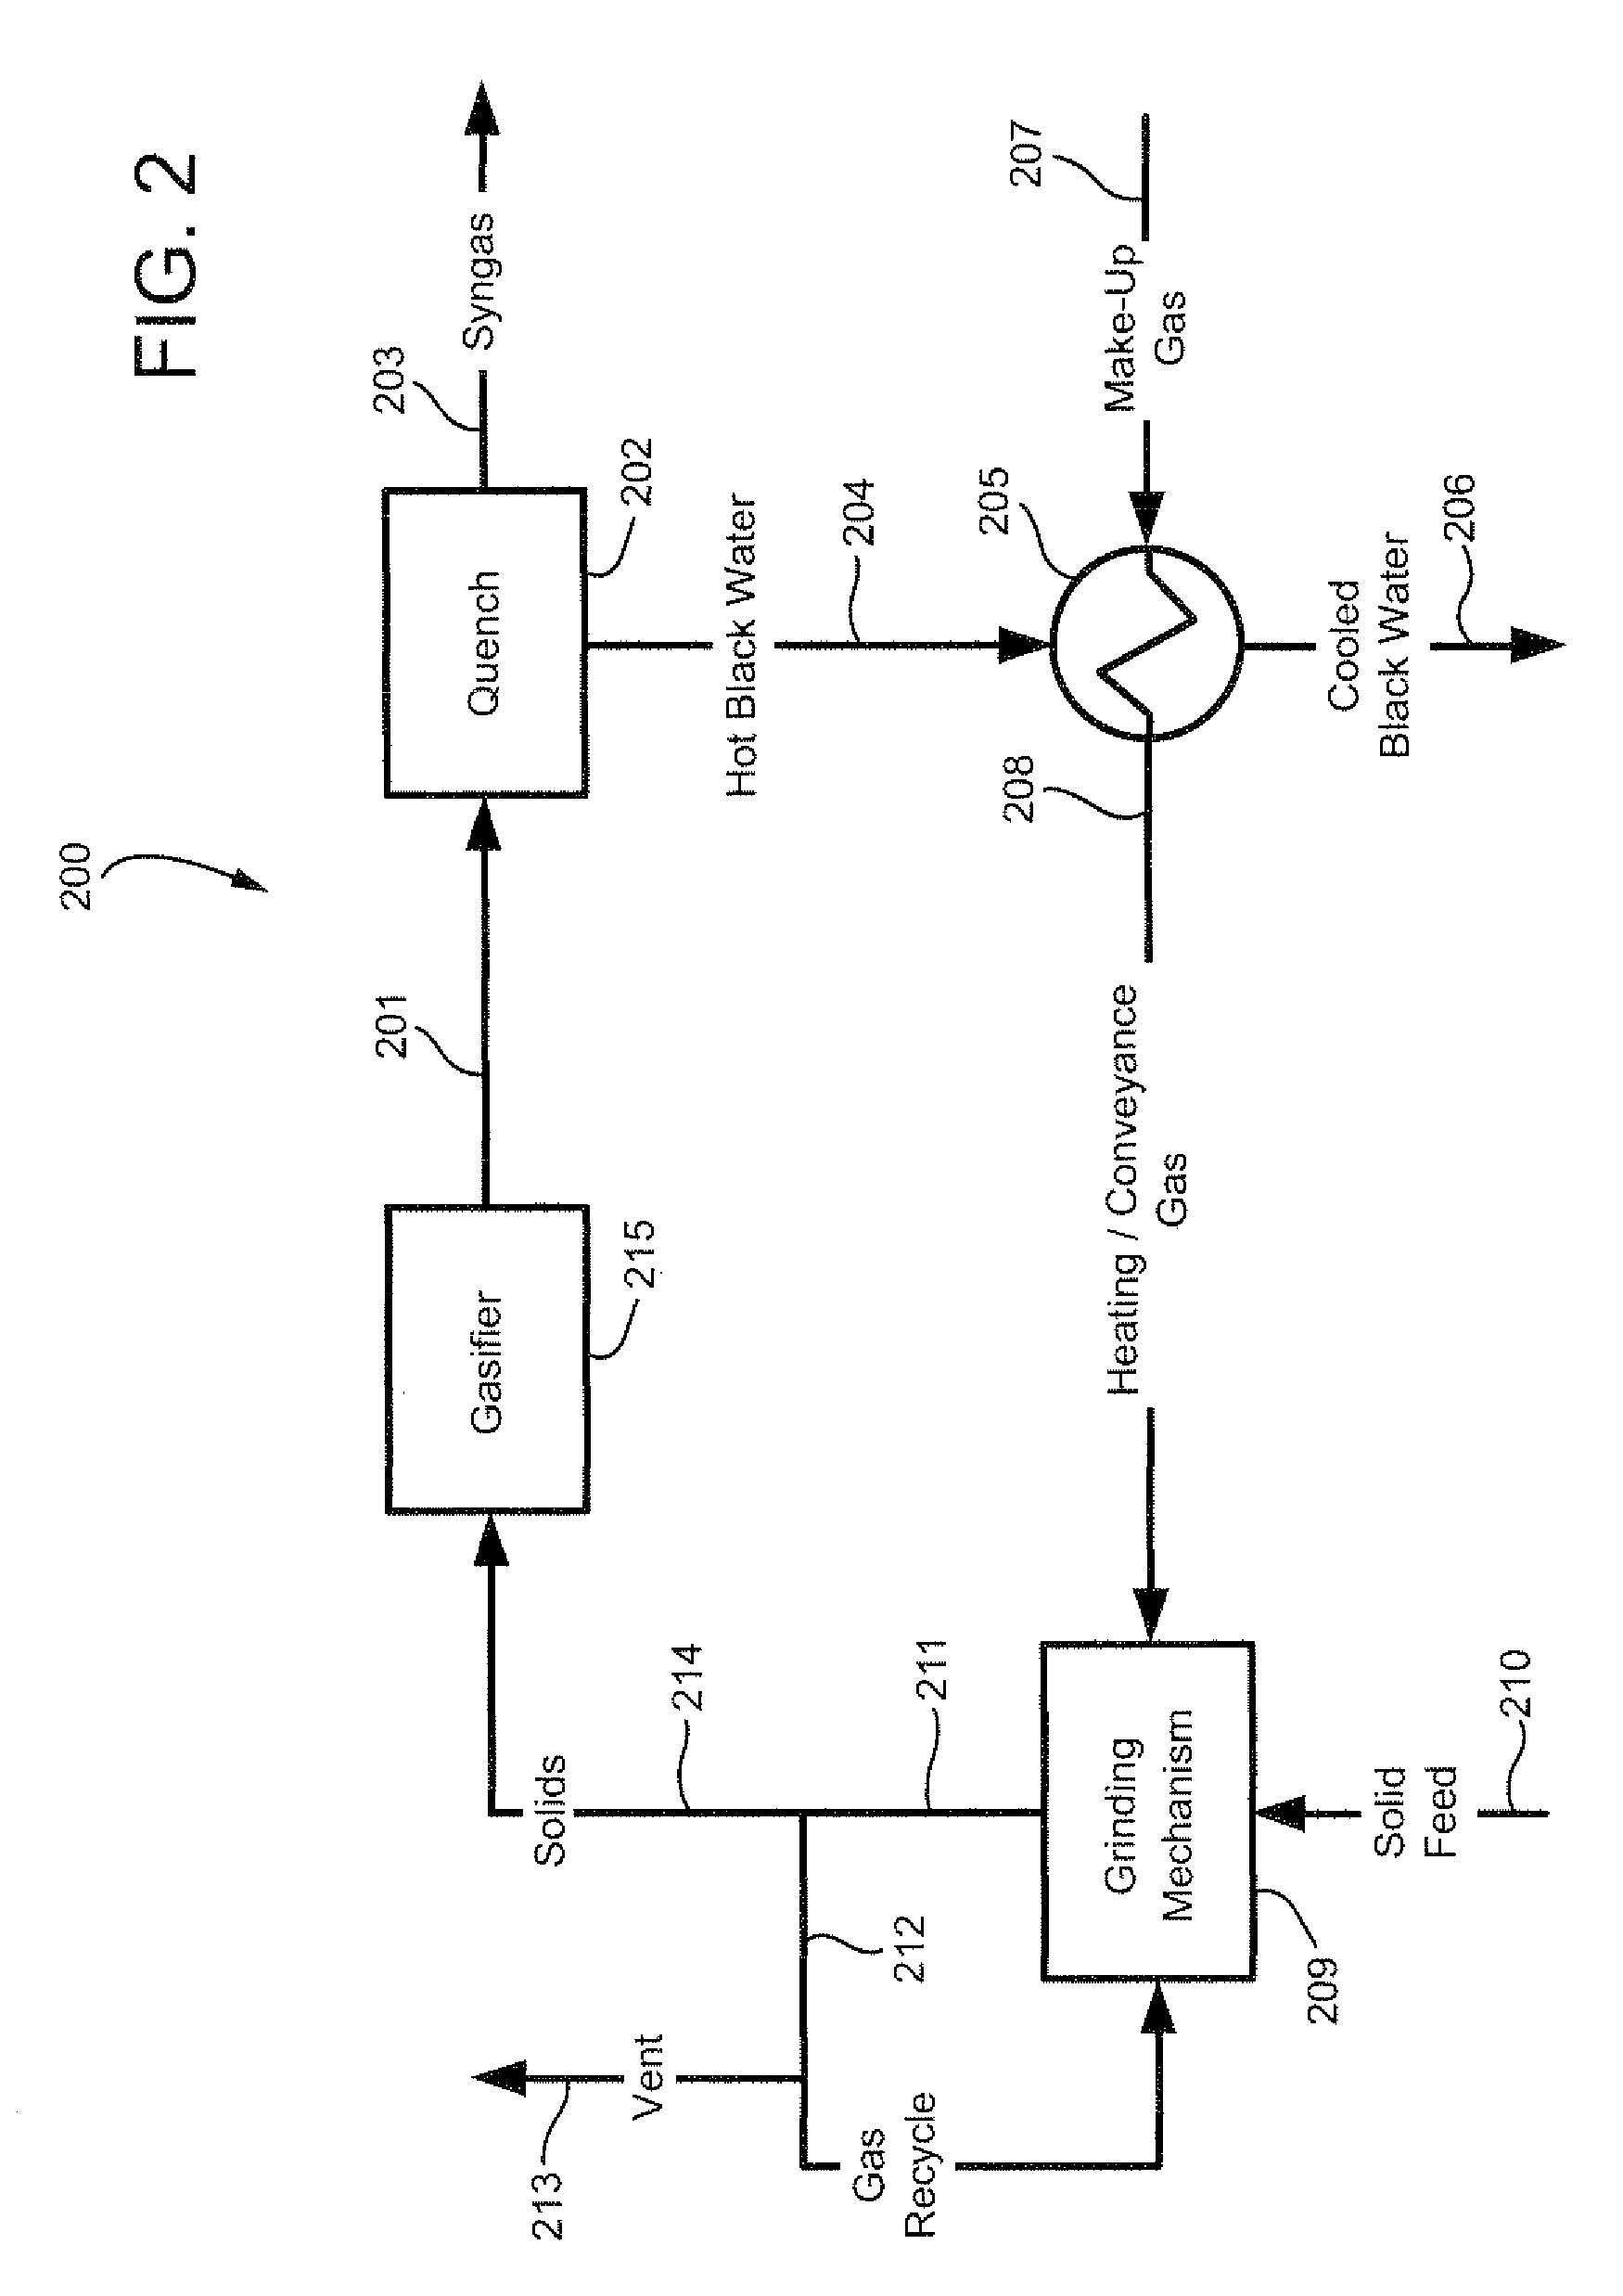 Method of using syngas cooling to heat drying gas for a dry feed system